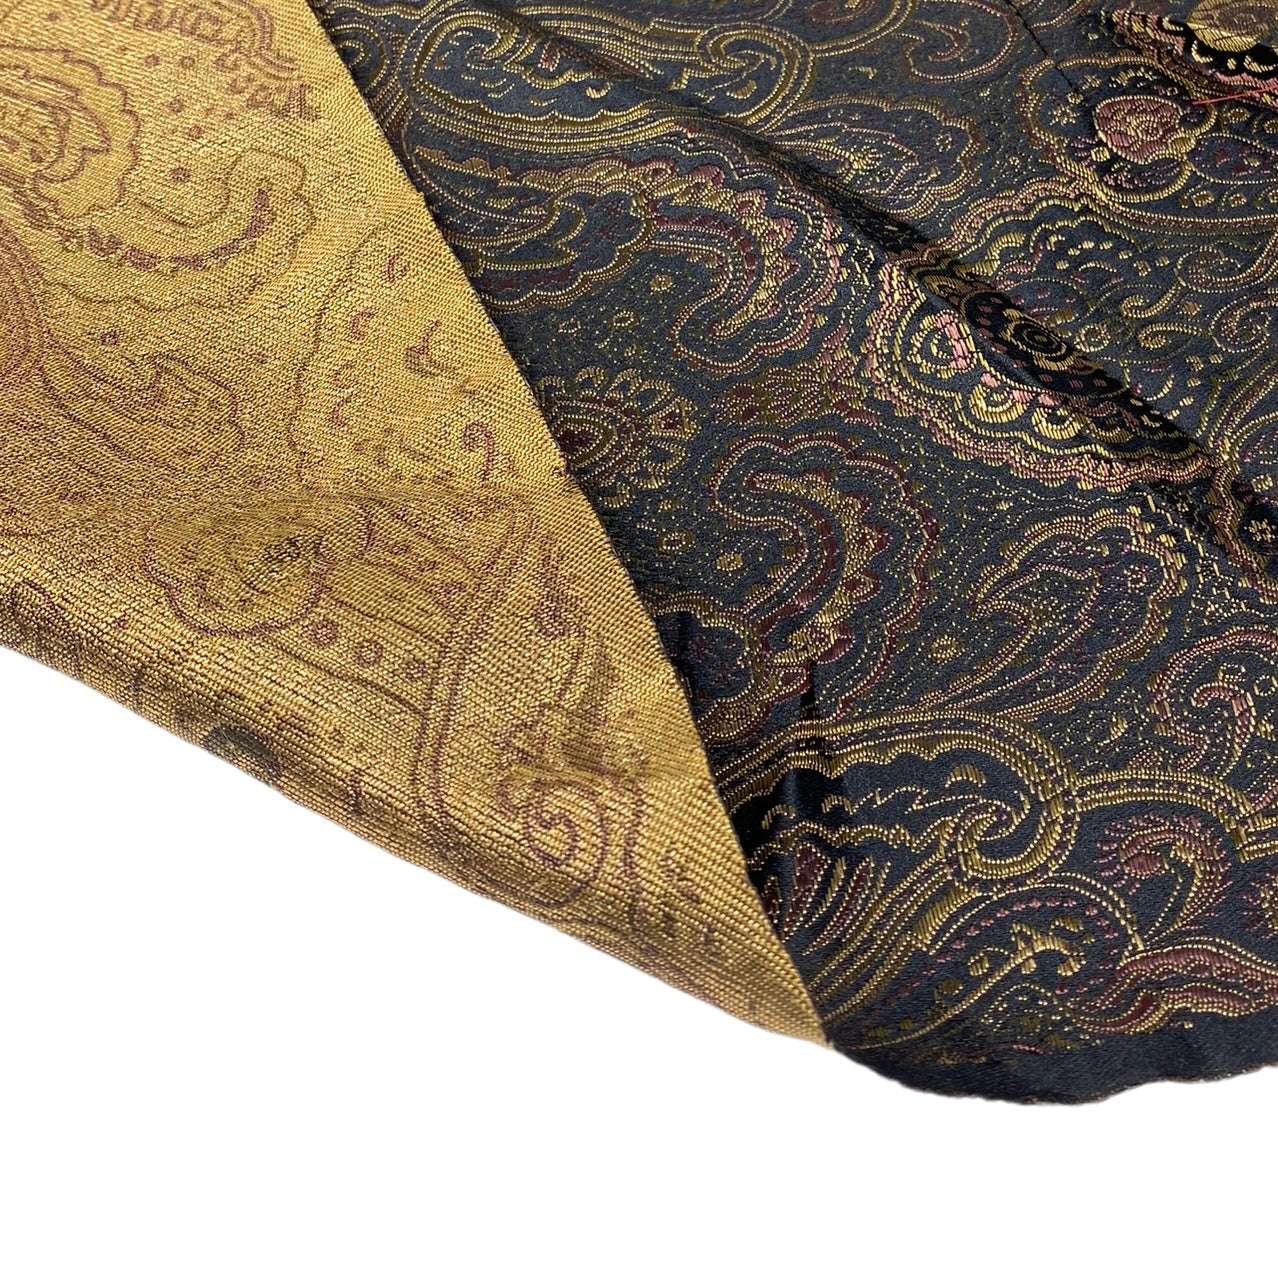 Polyester Paisley Jacquard - Black / Brown / Gold - Remnant